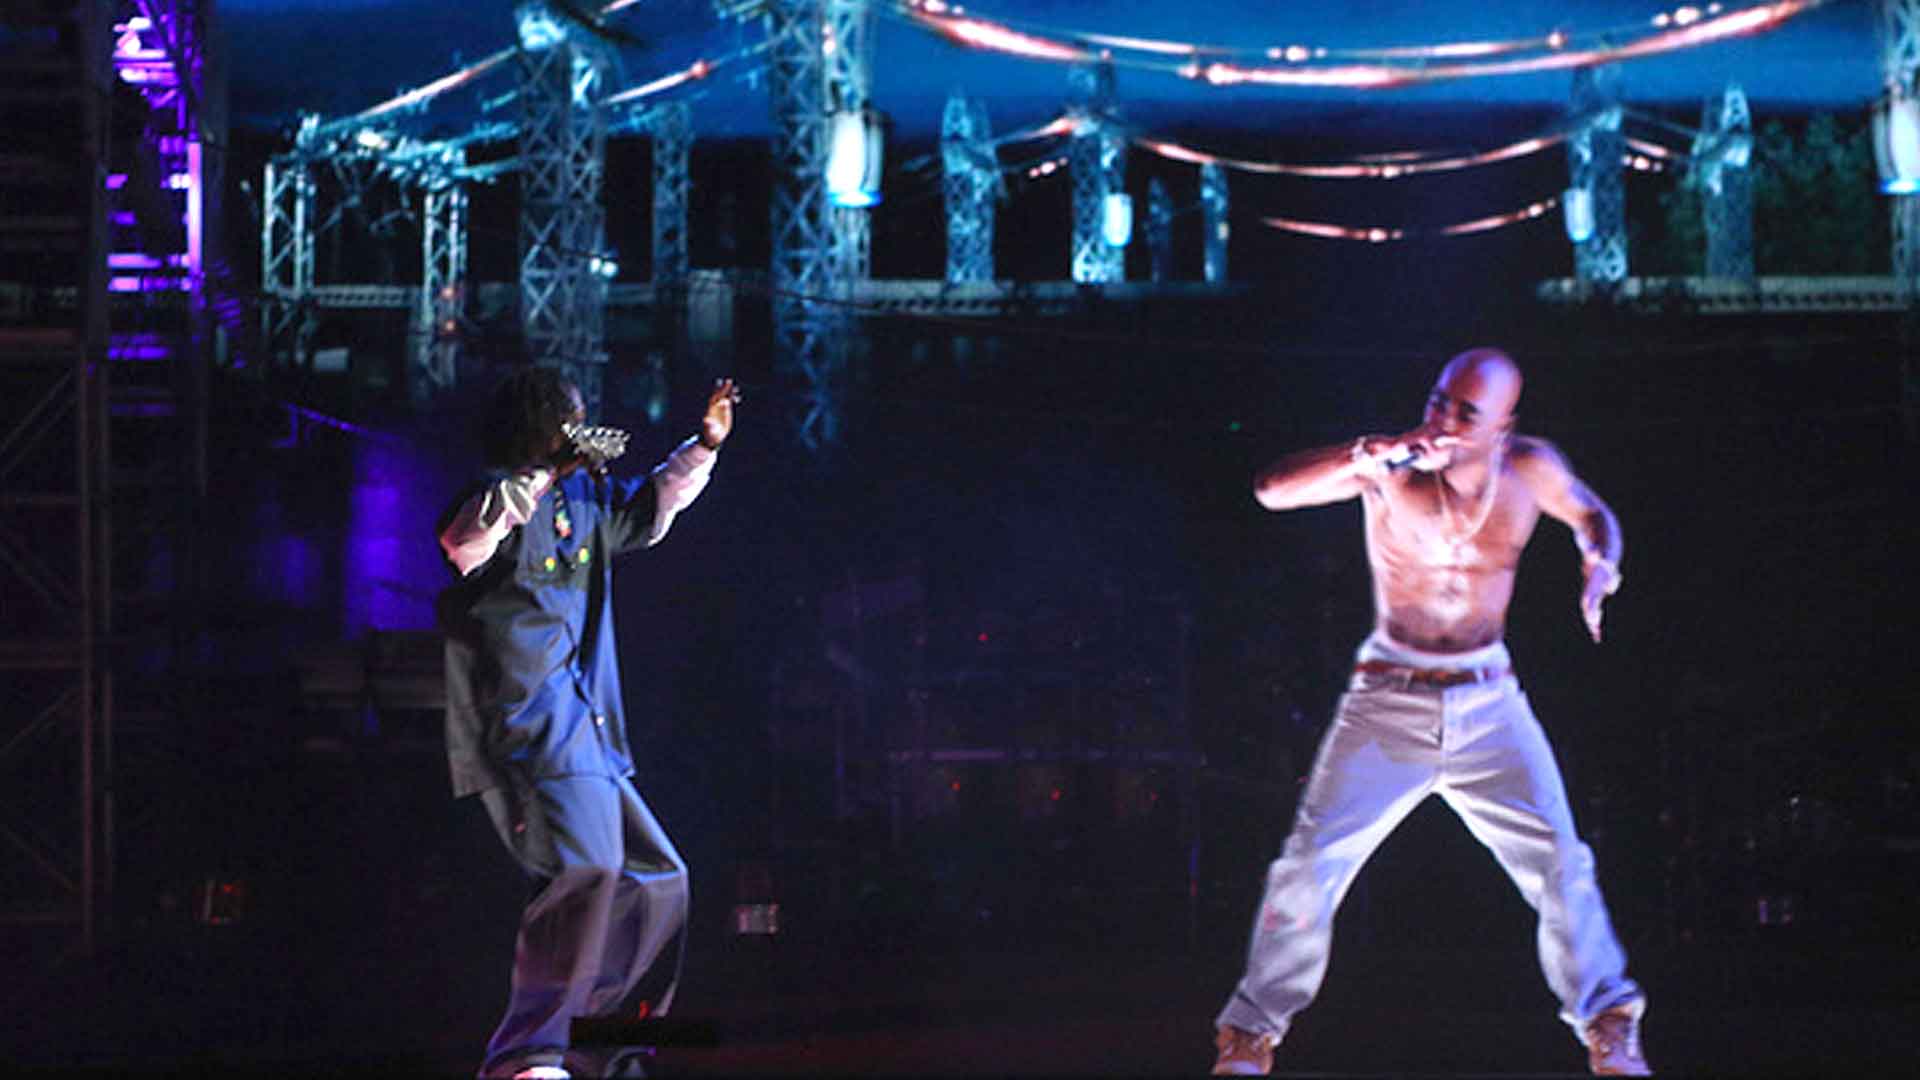 2Pac Hologram Makers File for Chapter 11 Bankruptcy